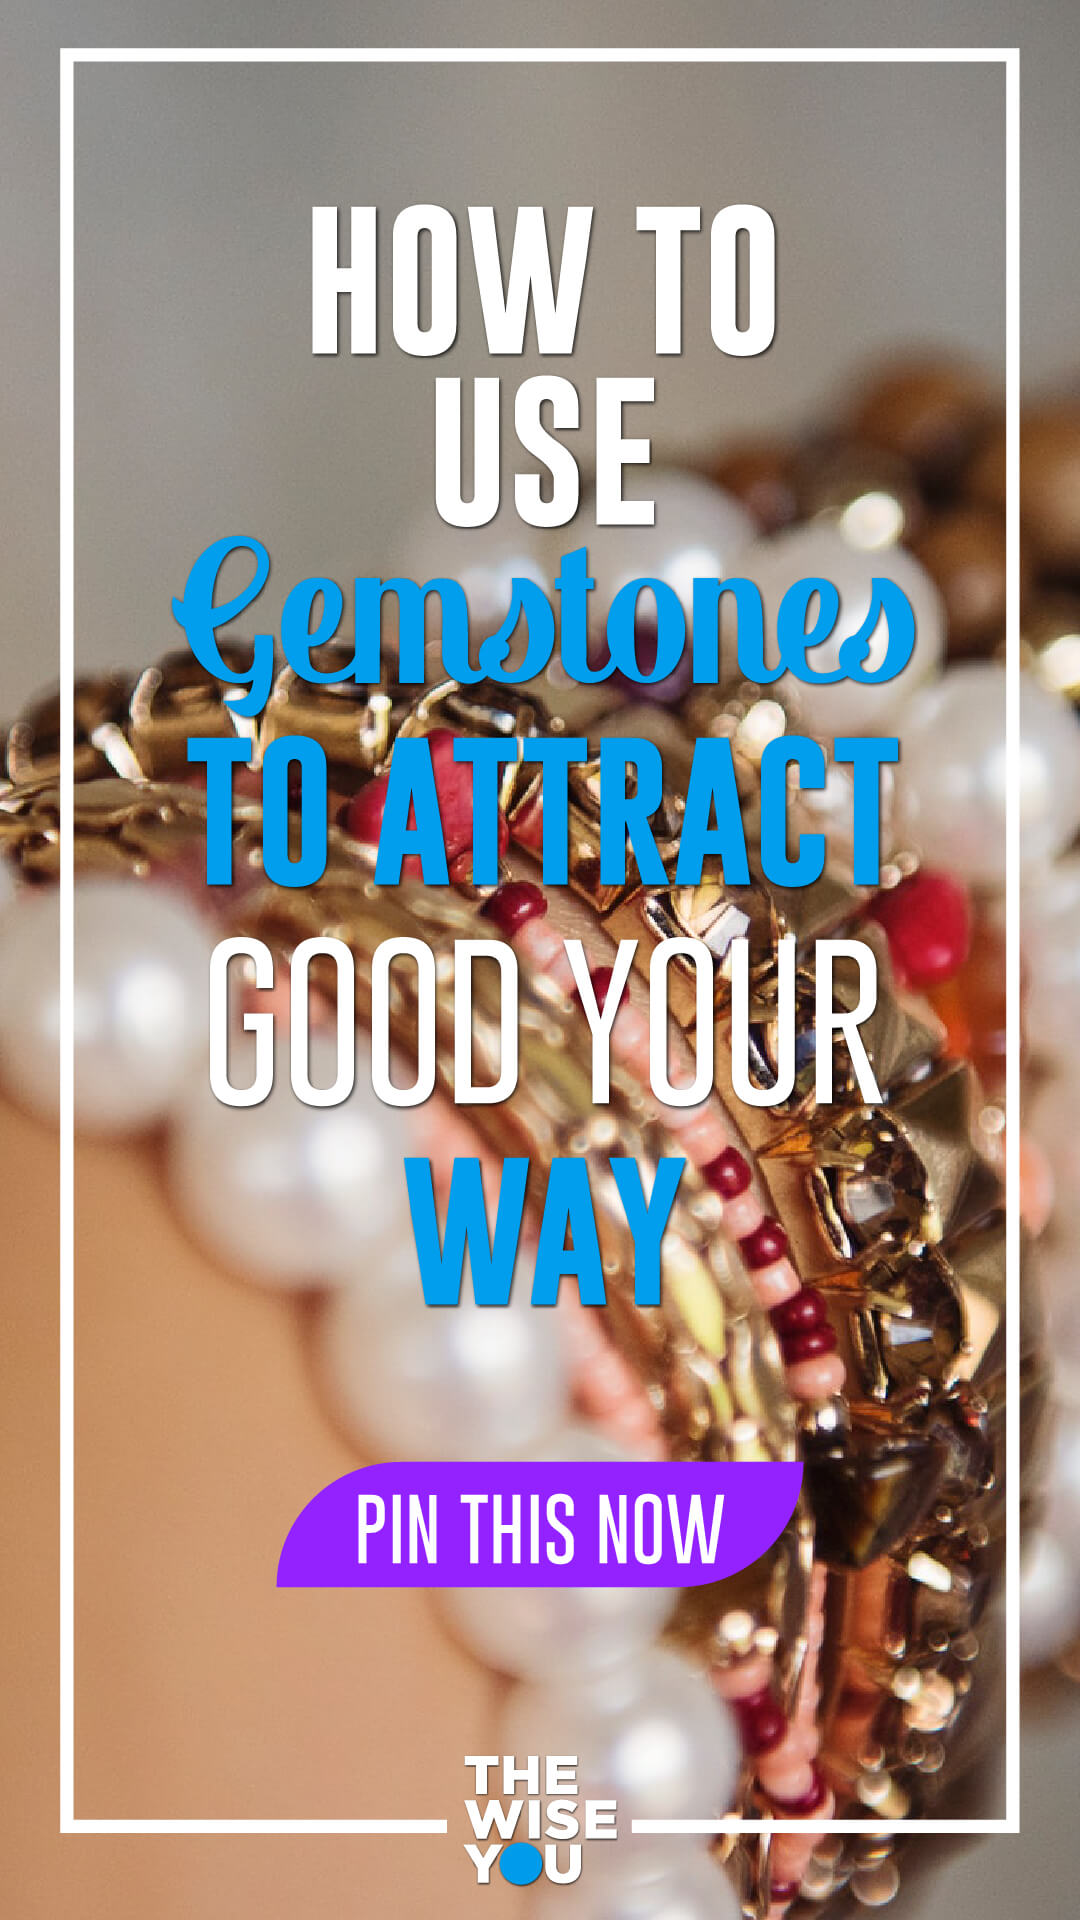 How to Use Gemstones to Attract Good Your Way